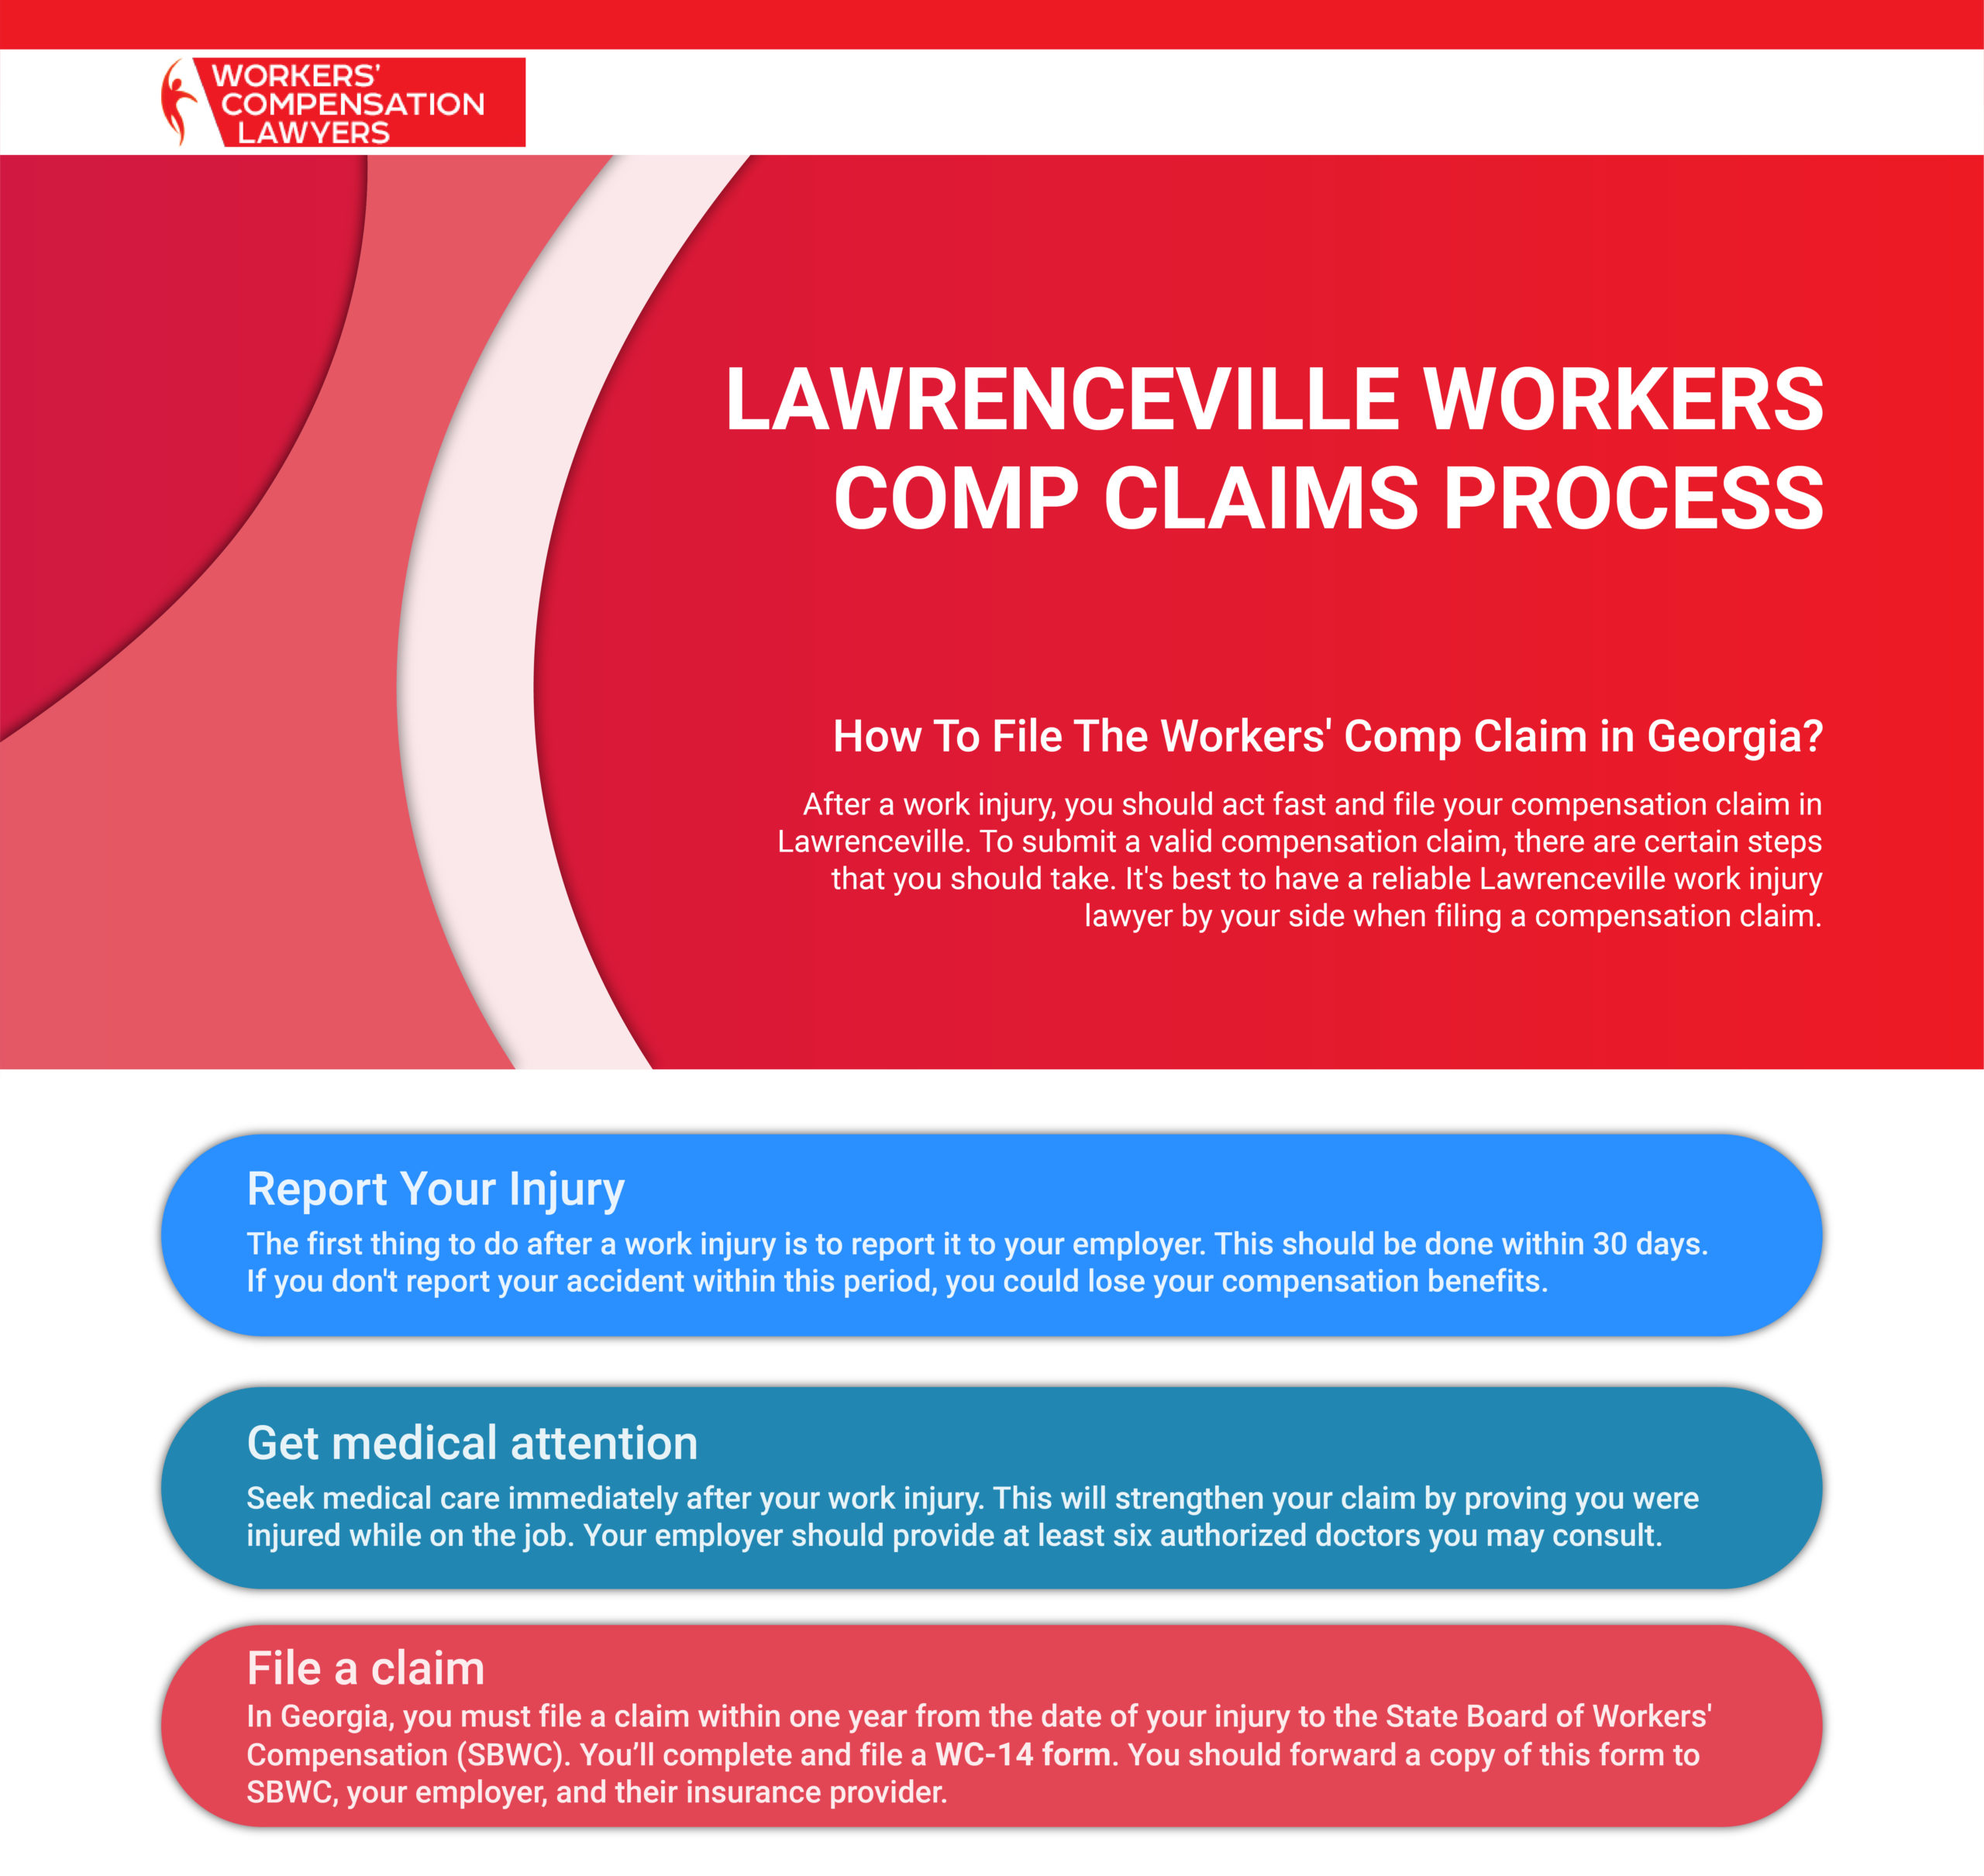 Lawrenceville Workers Compensation Claim Process Infographic